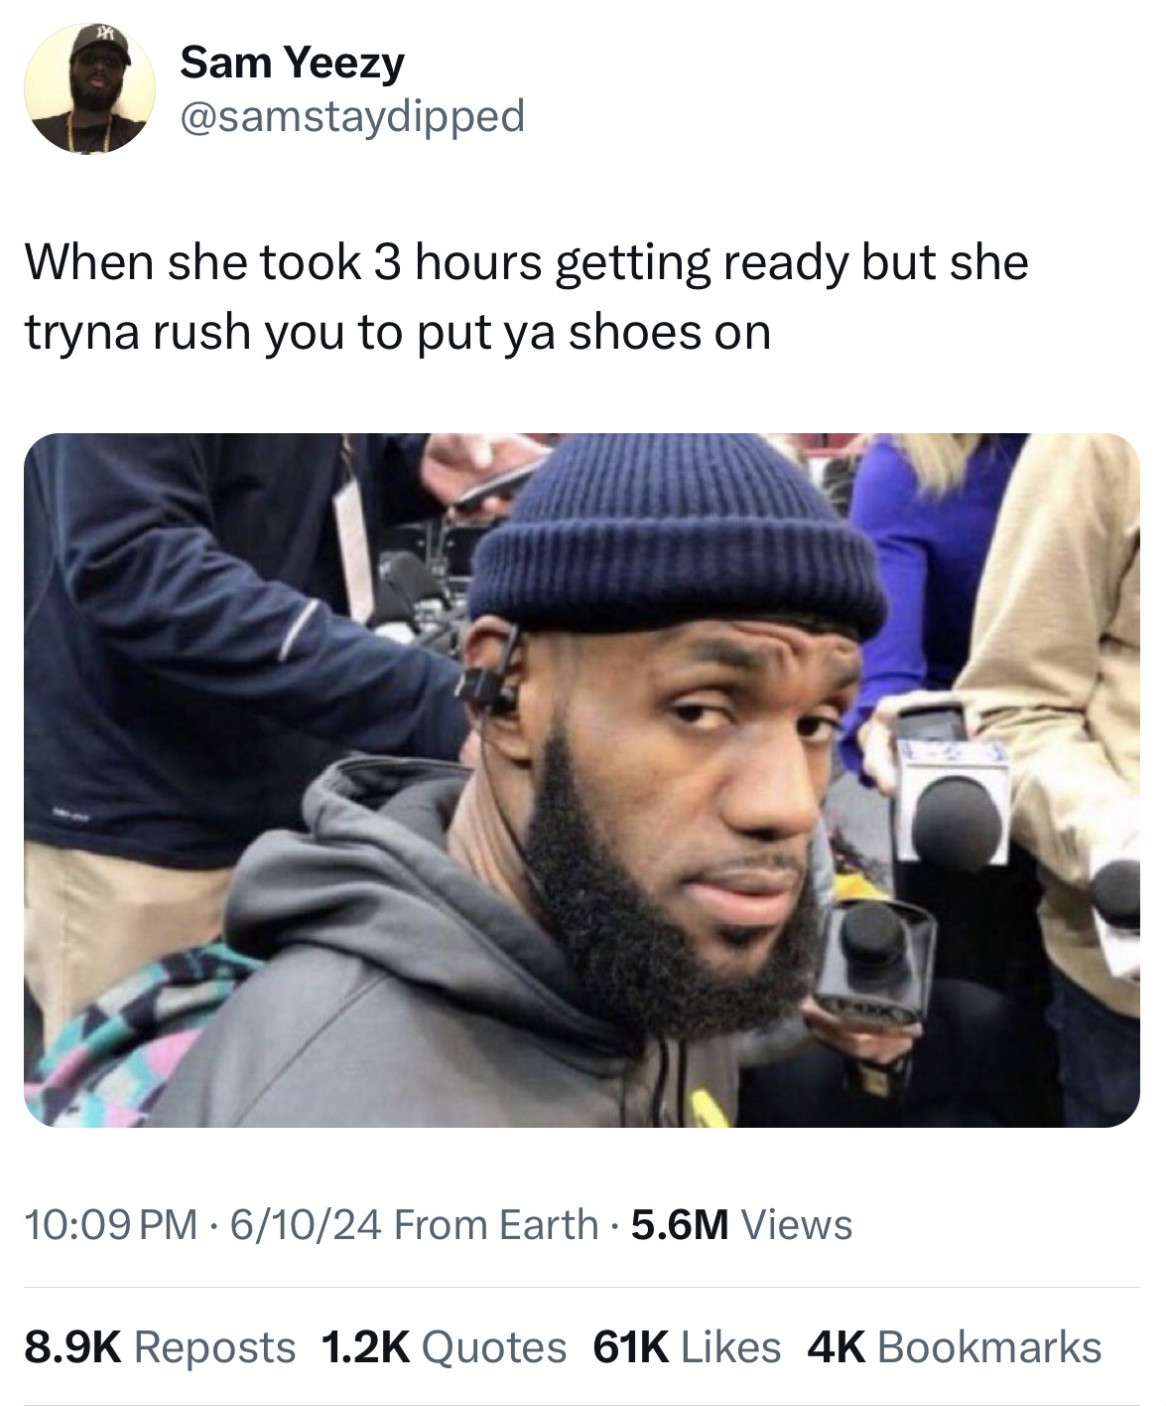 lebron james beanie - Sam Yeezy When she took 3 hours getting ready but she tryna rush you to put ya shoes on 61024 From Earth 5.6M Views Reposts Quotes 61K 4K Bookmarks